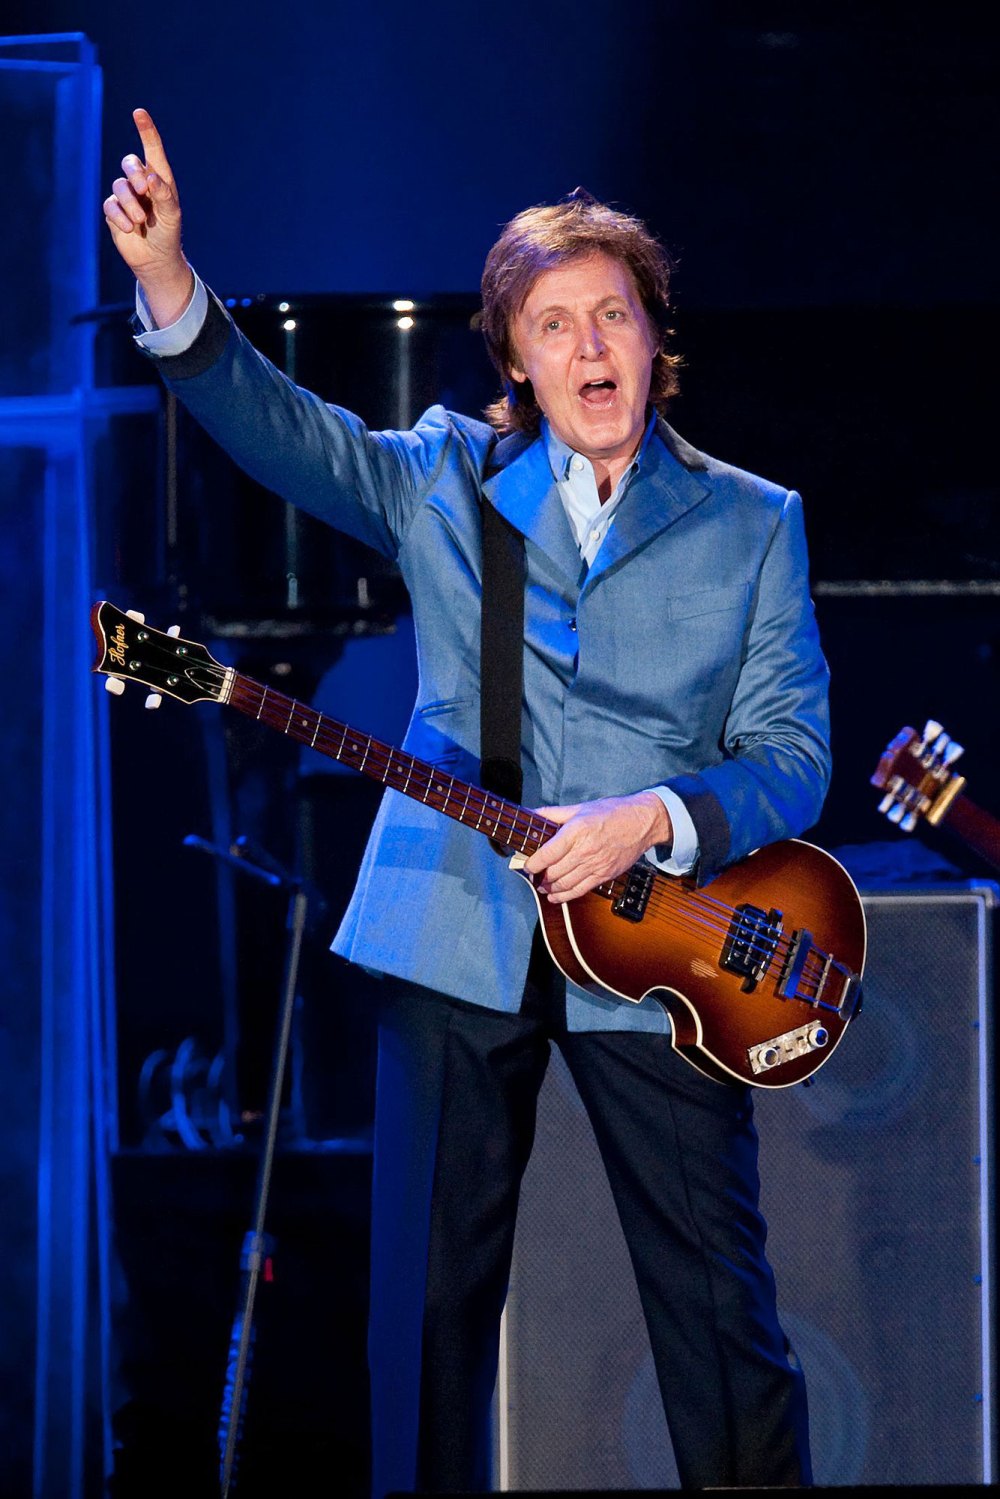 Bonnaroo Lineup to Feature Paul McCartney, Mumford & Sons, Wilco, R. Kelly